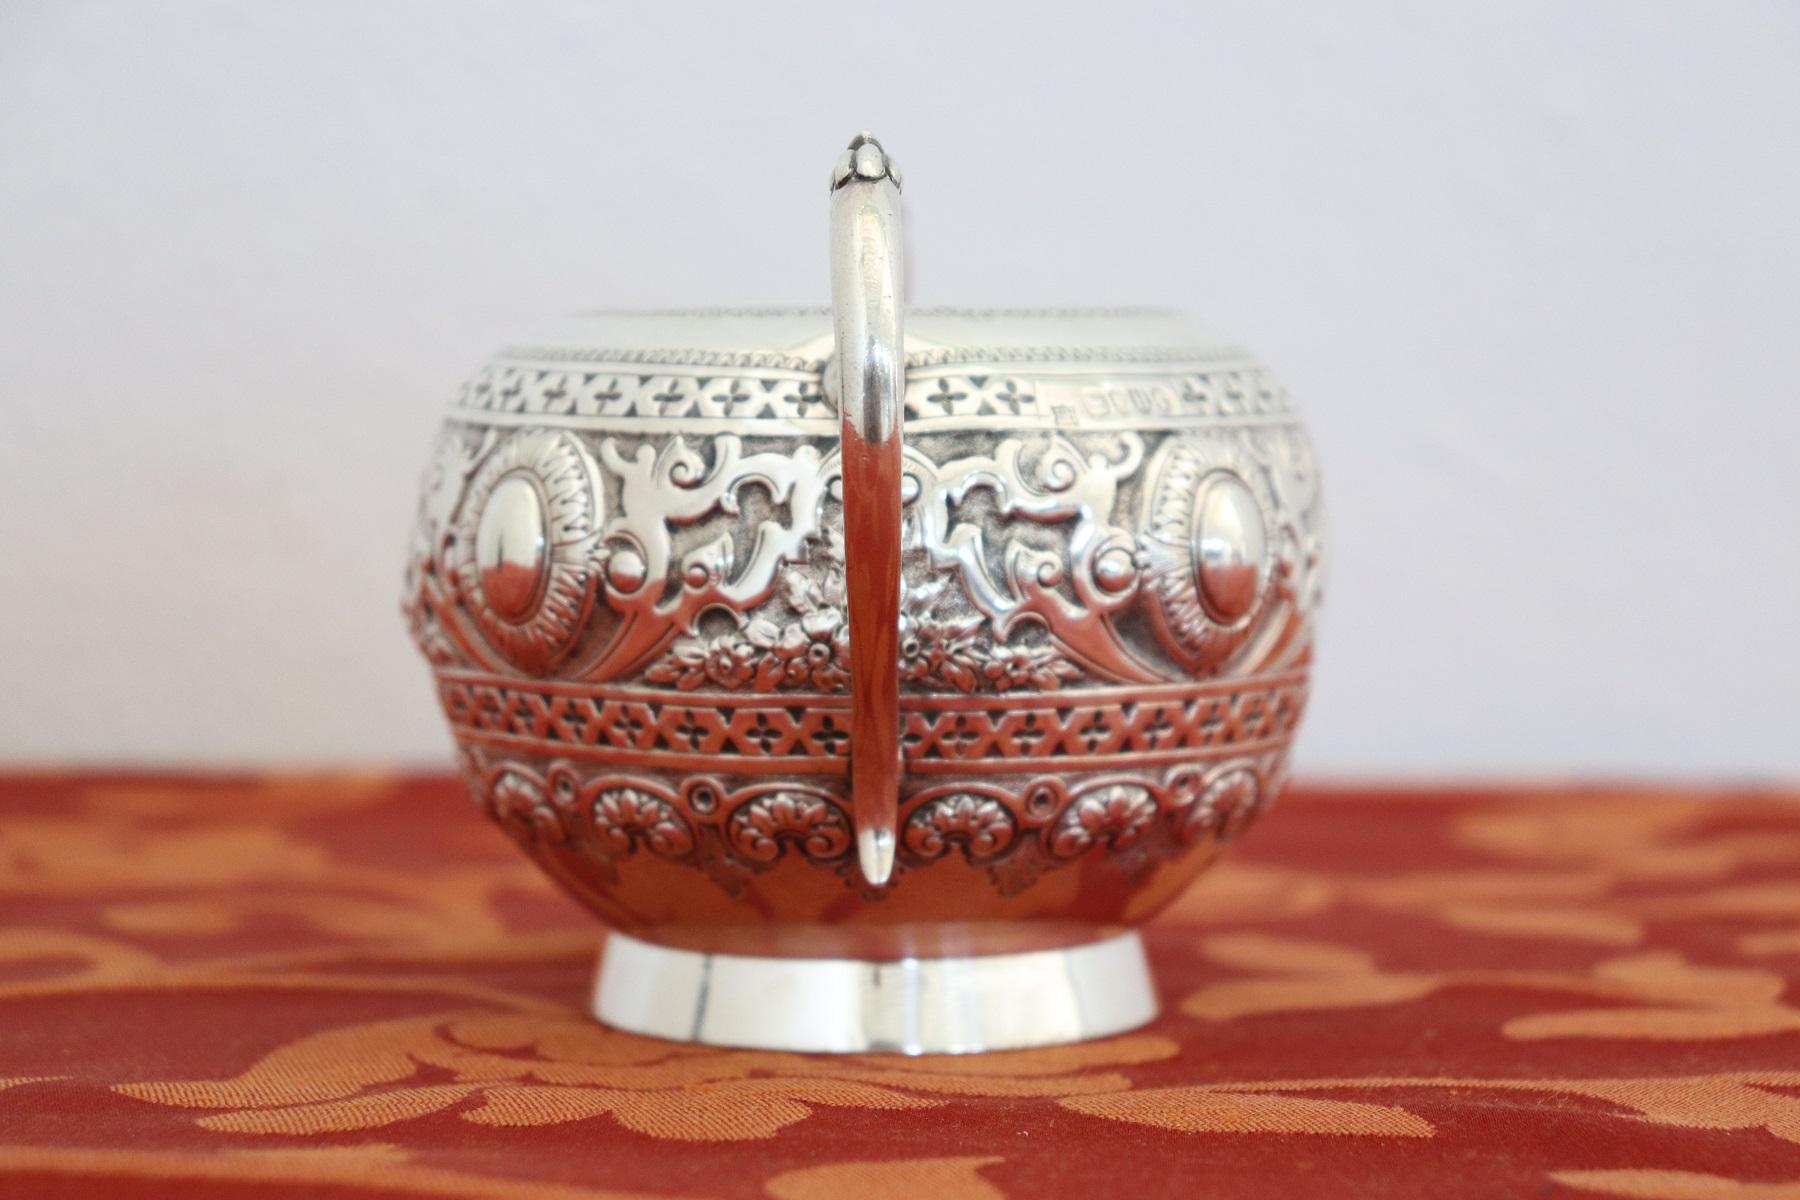 20th century English Victorian sterling silver bowl with handles, 1883s. The whole body is finely ornamented. The regular series of markings imprinted in line on the object, places the execution in Great Britain. It was made of 925/1000 silver and